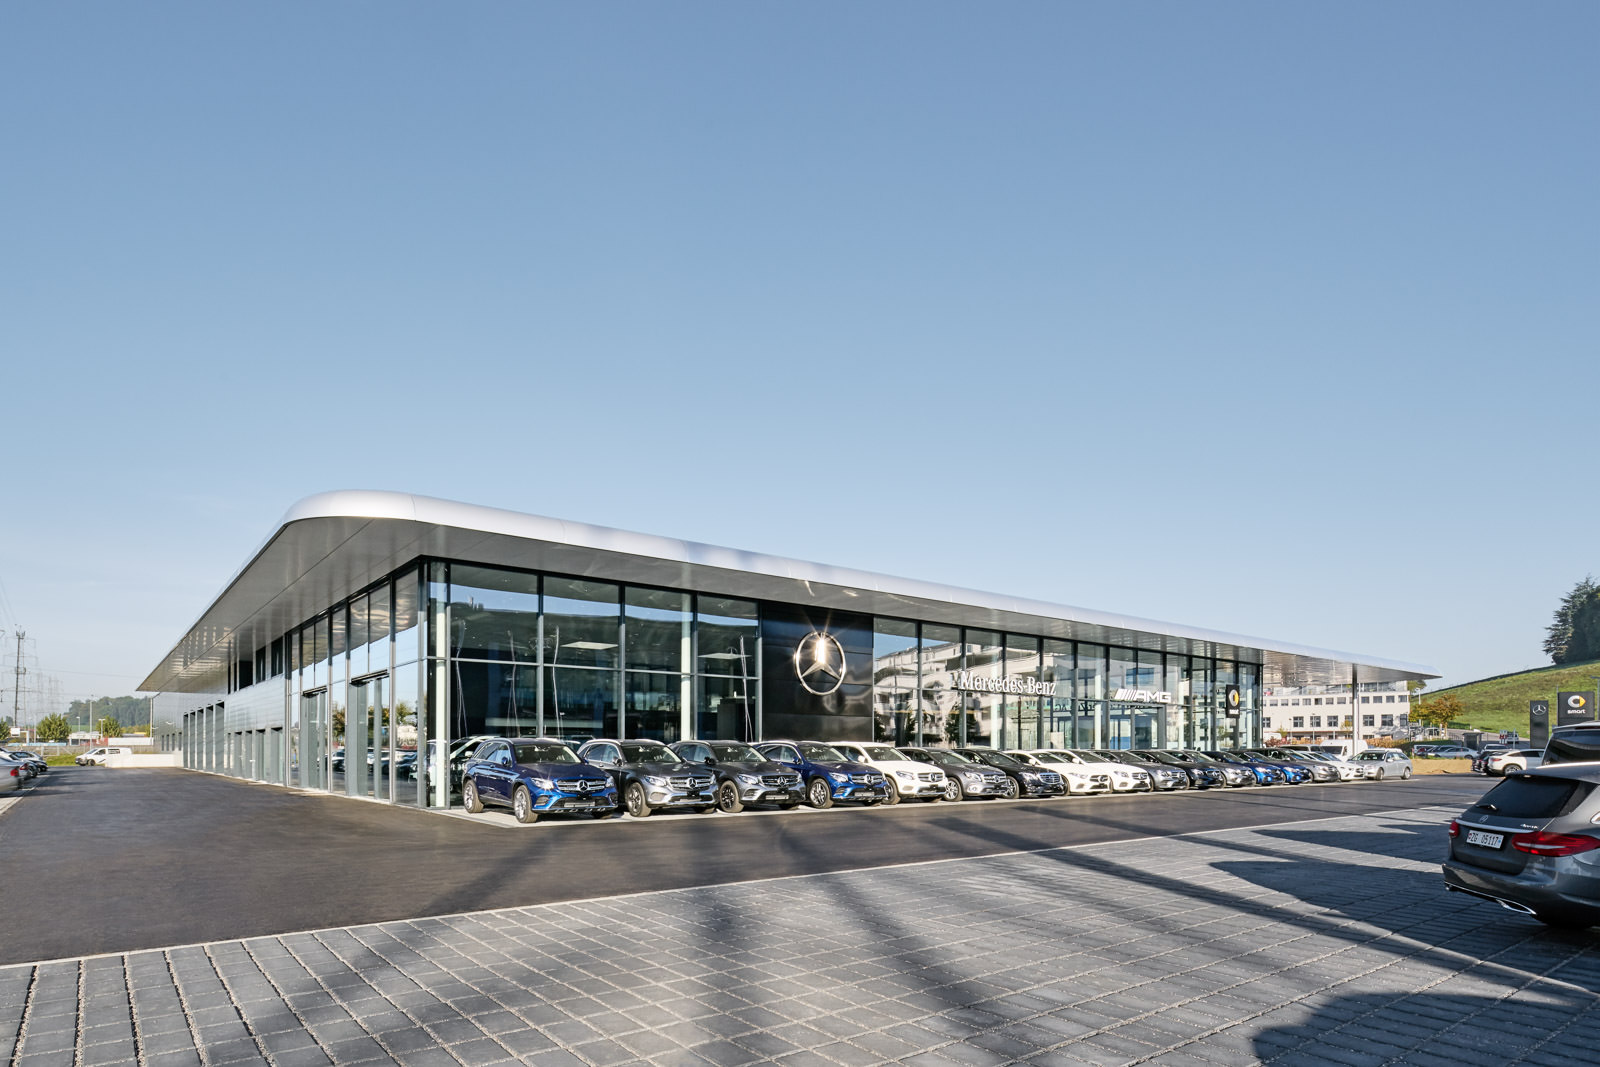 Image campaign:Commercial real estate and architecture photography - Mercedes Benz Garage Steinhausen